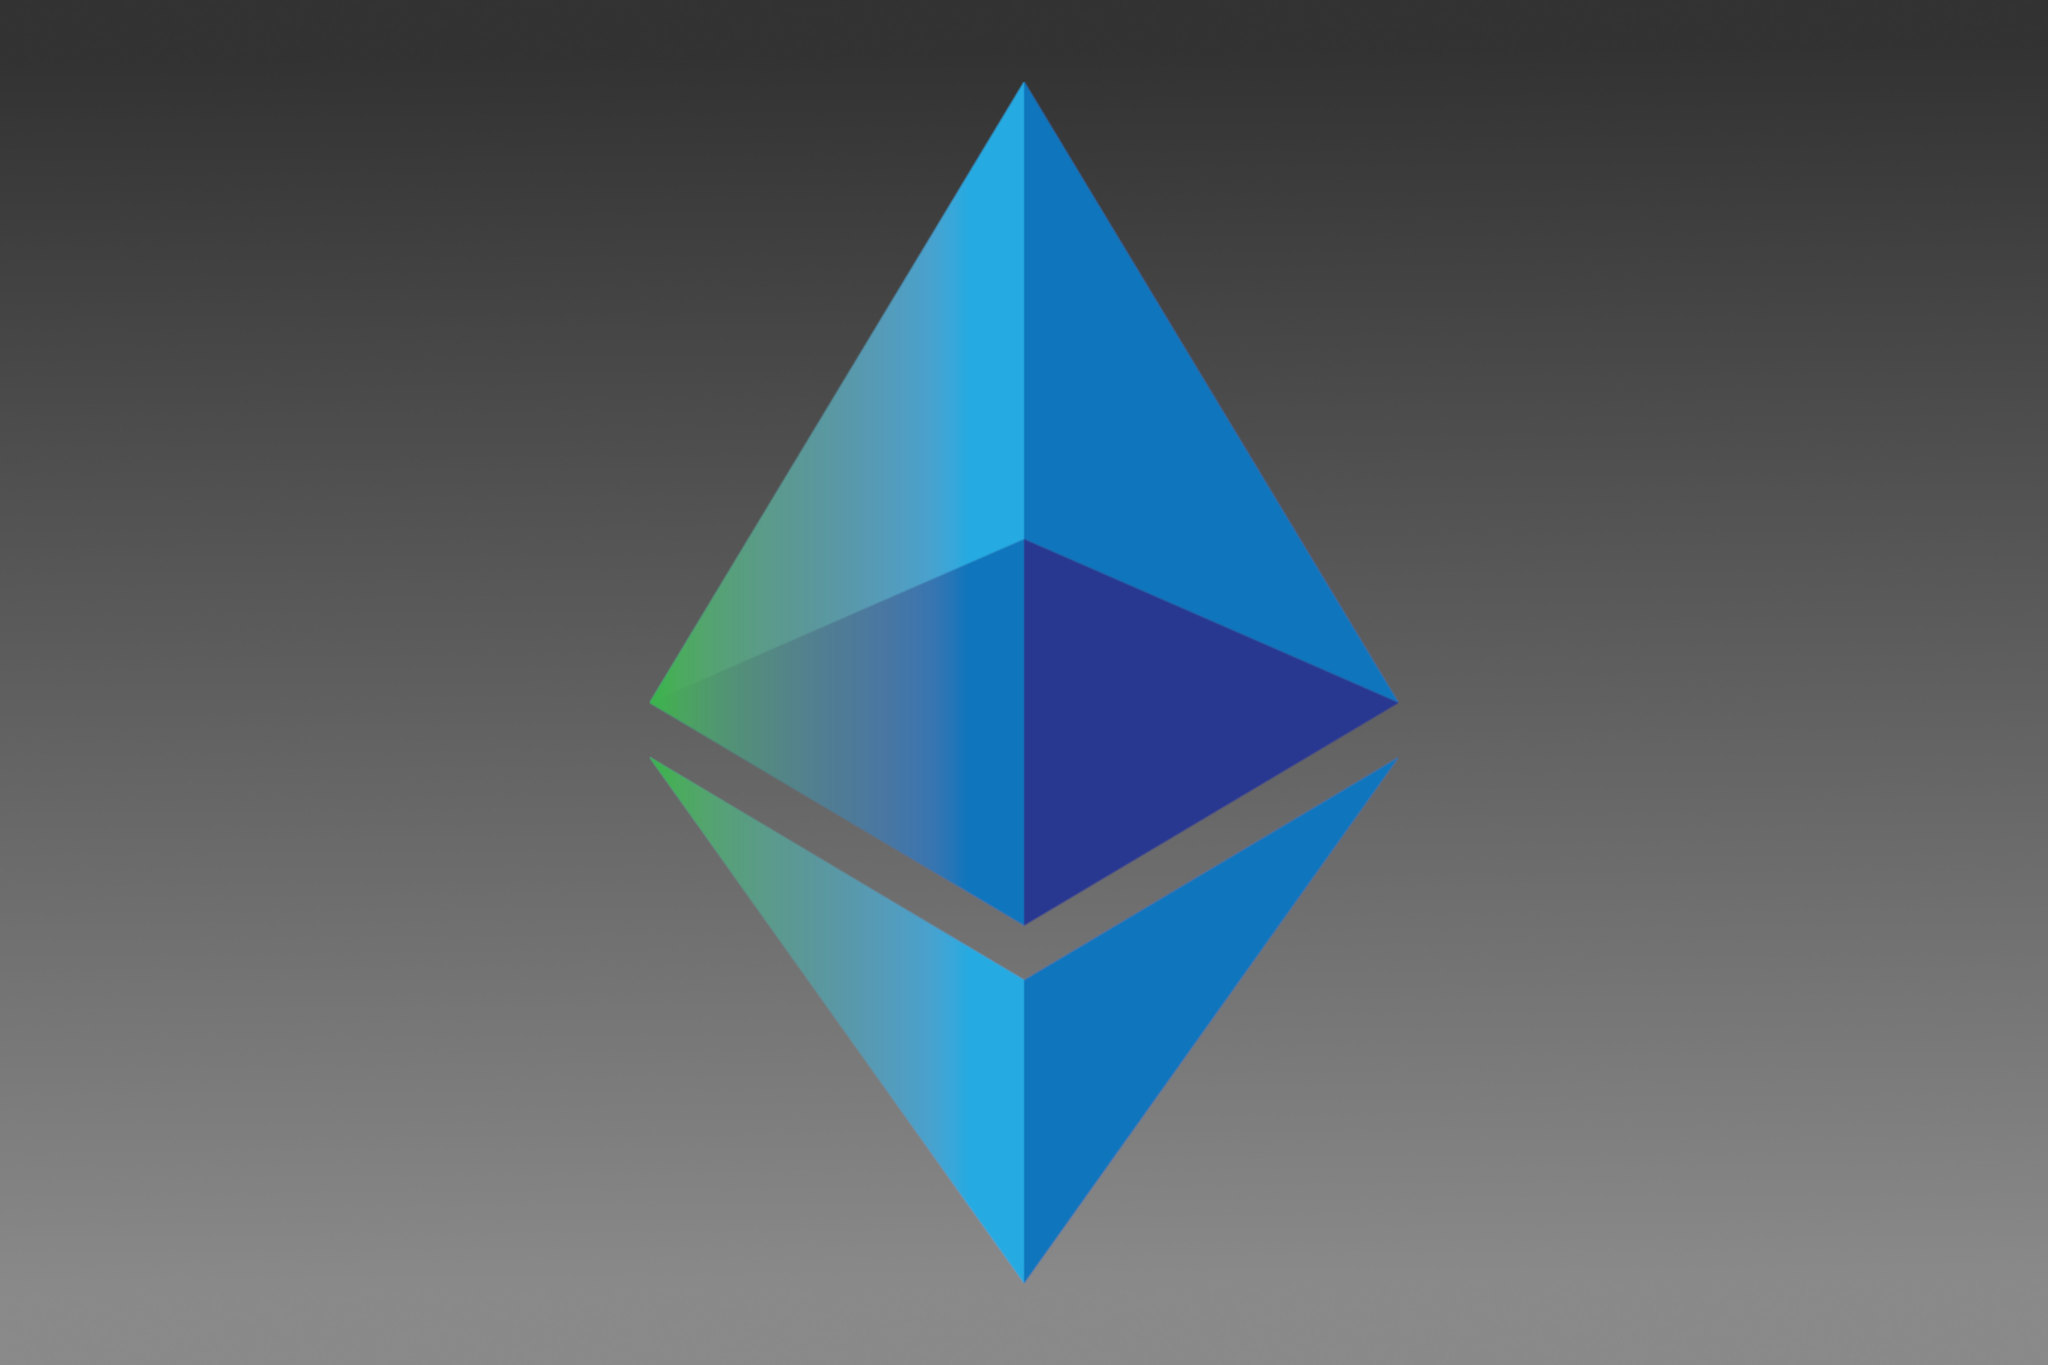 Ethereum 2.0: are you ready for some major updates?